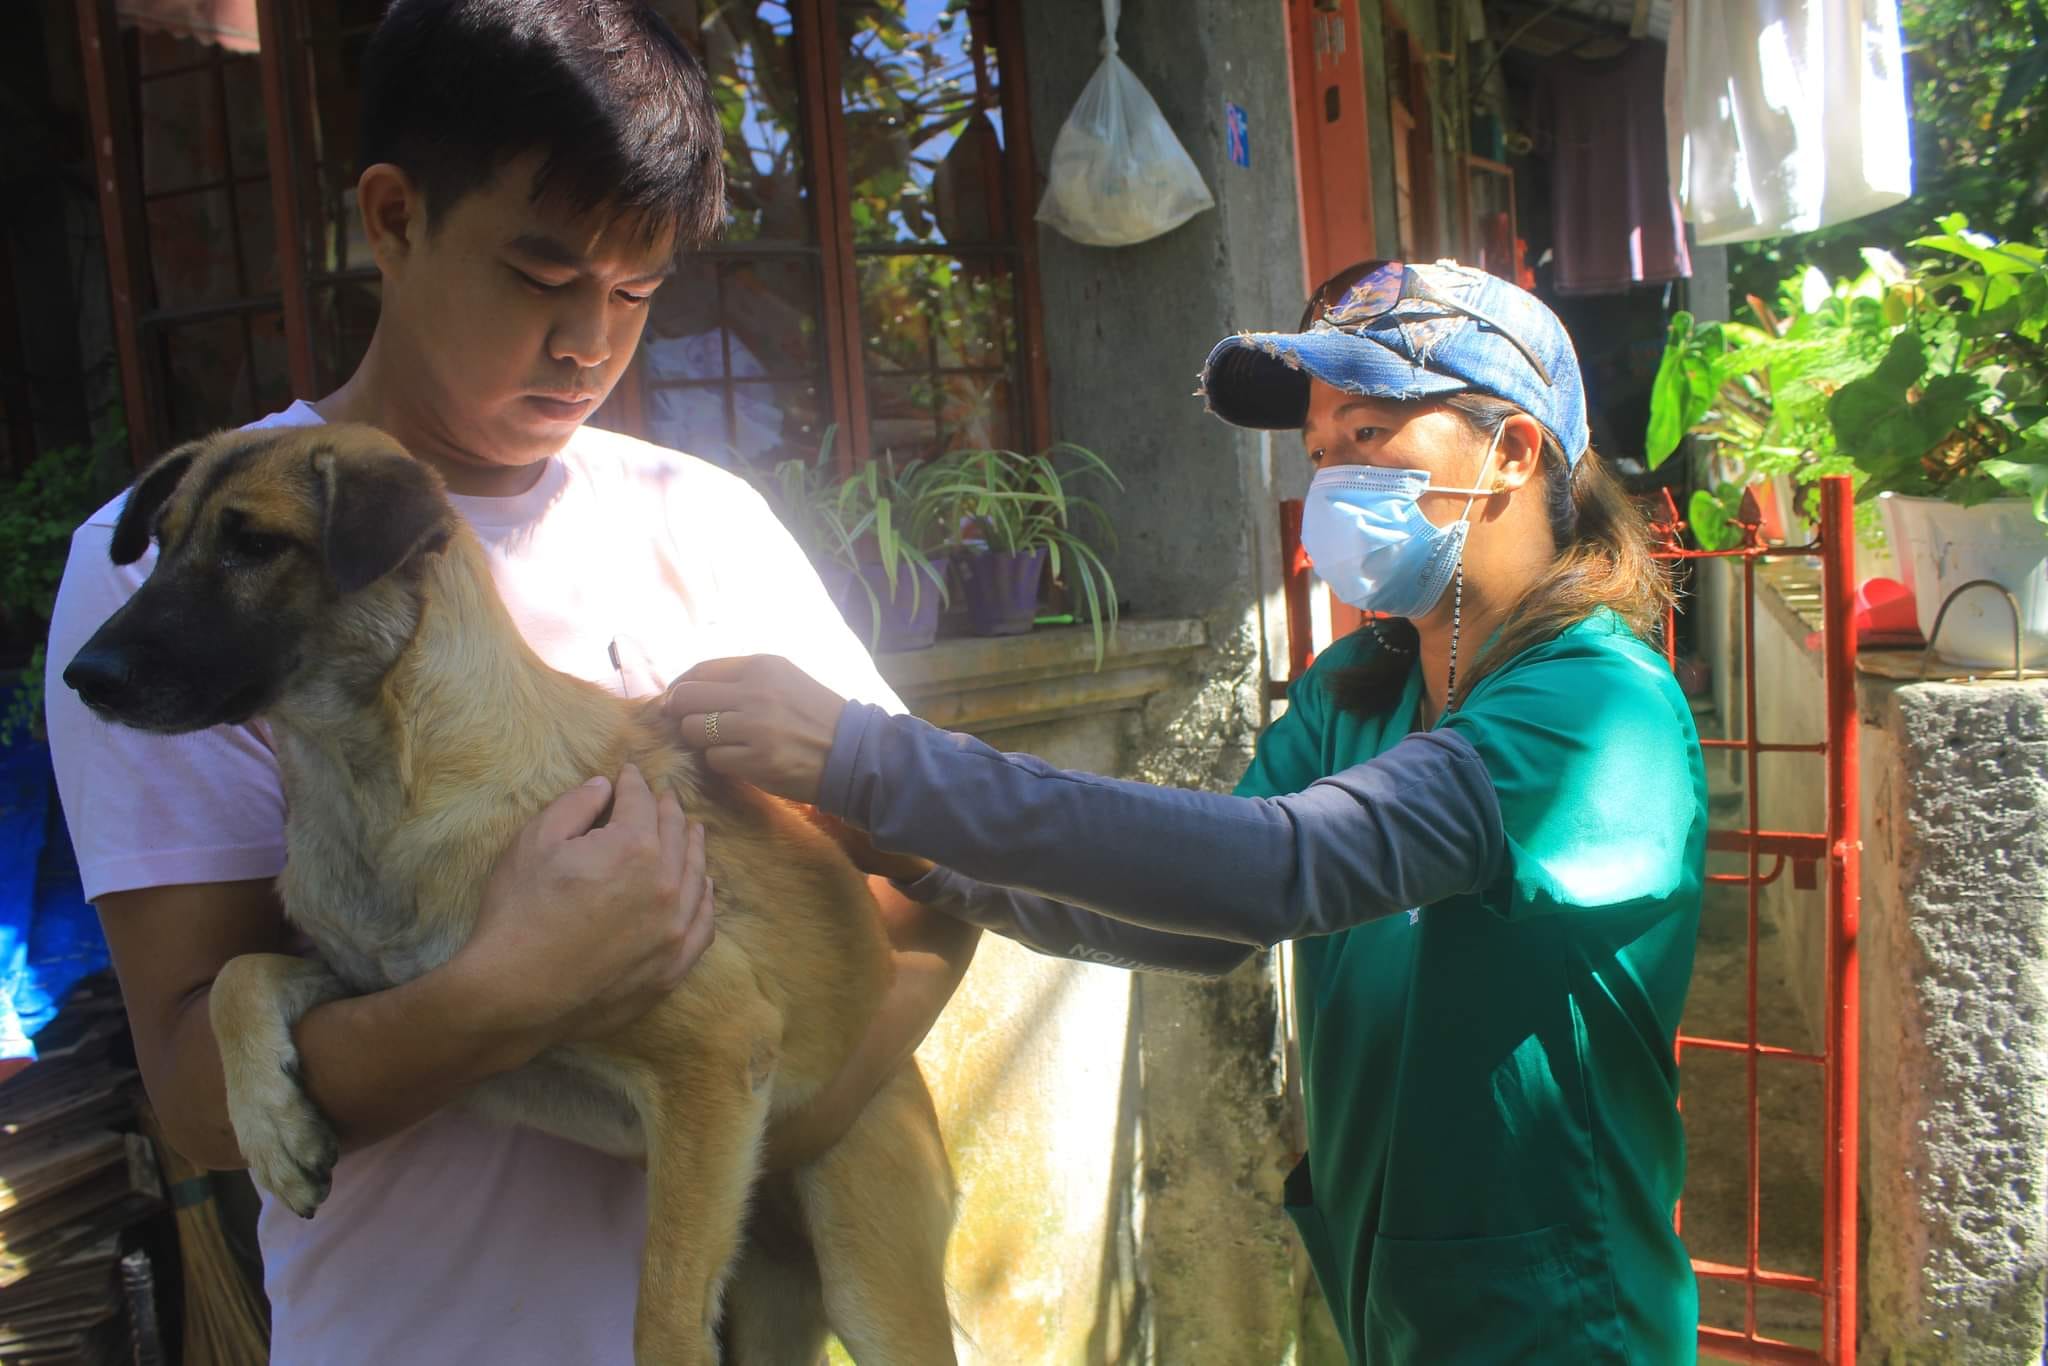 Pilar OMAg holds House to House Mass Anti-Rabies Vaccination of Dogs and Cats